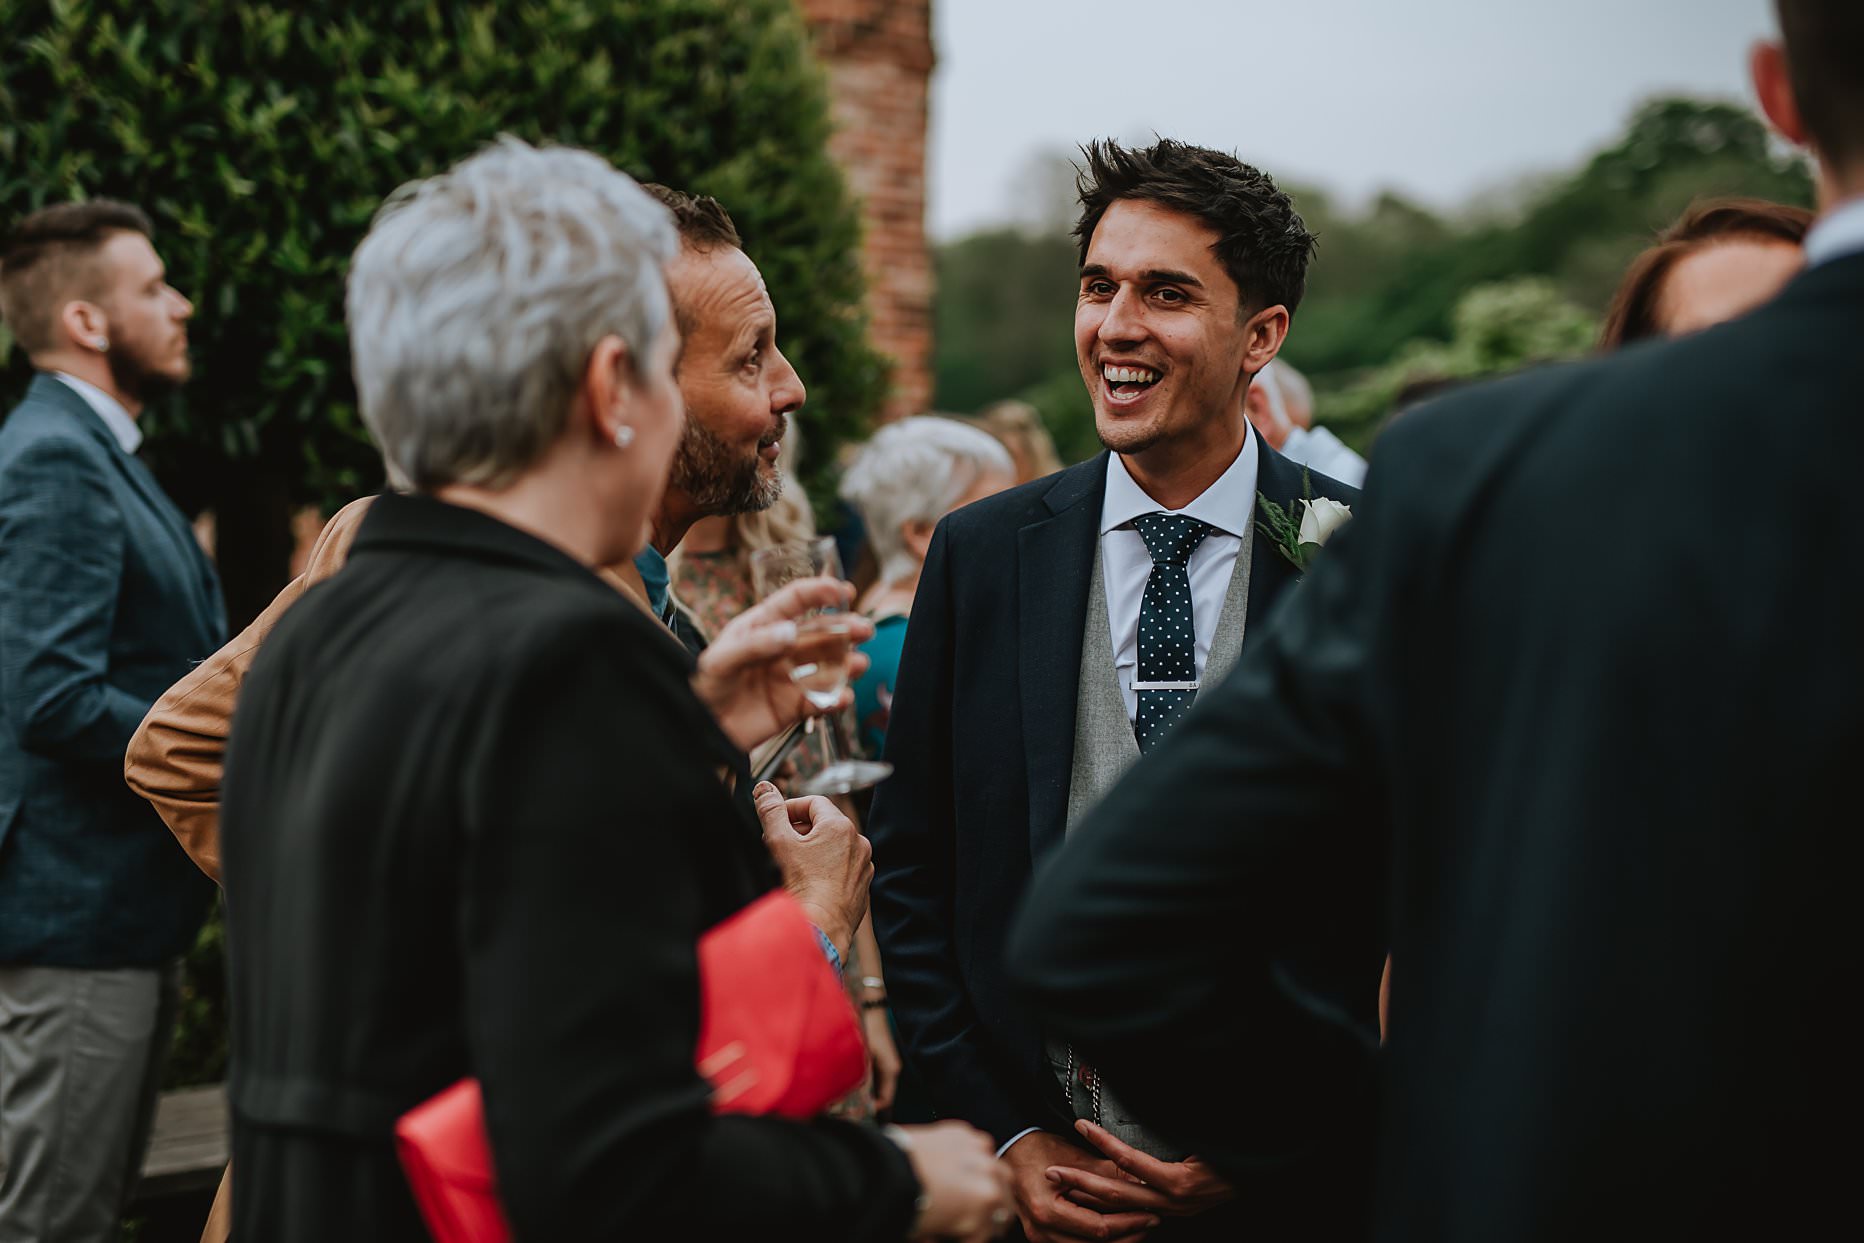 Groom chatting to his wedding guests during the drinks reception. He is happy and smiling.